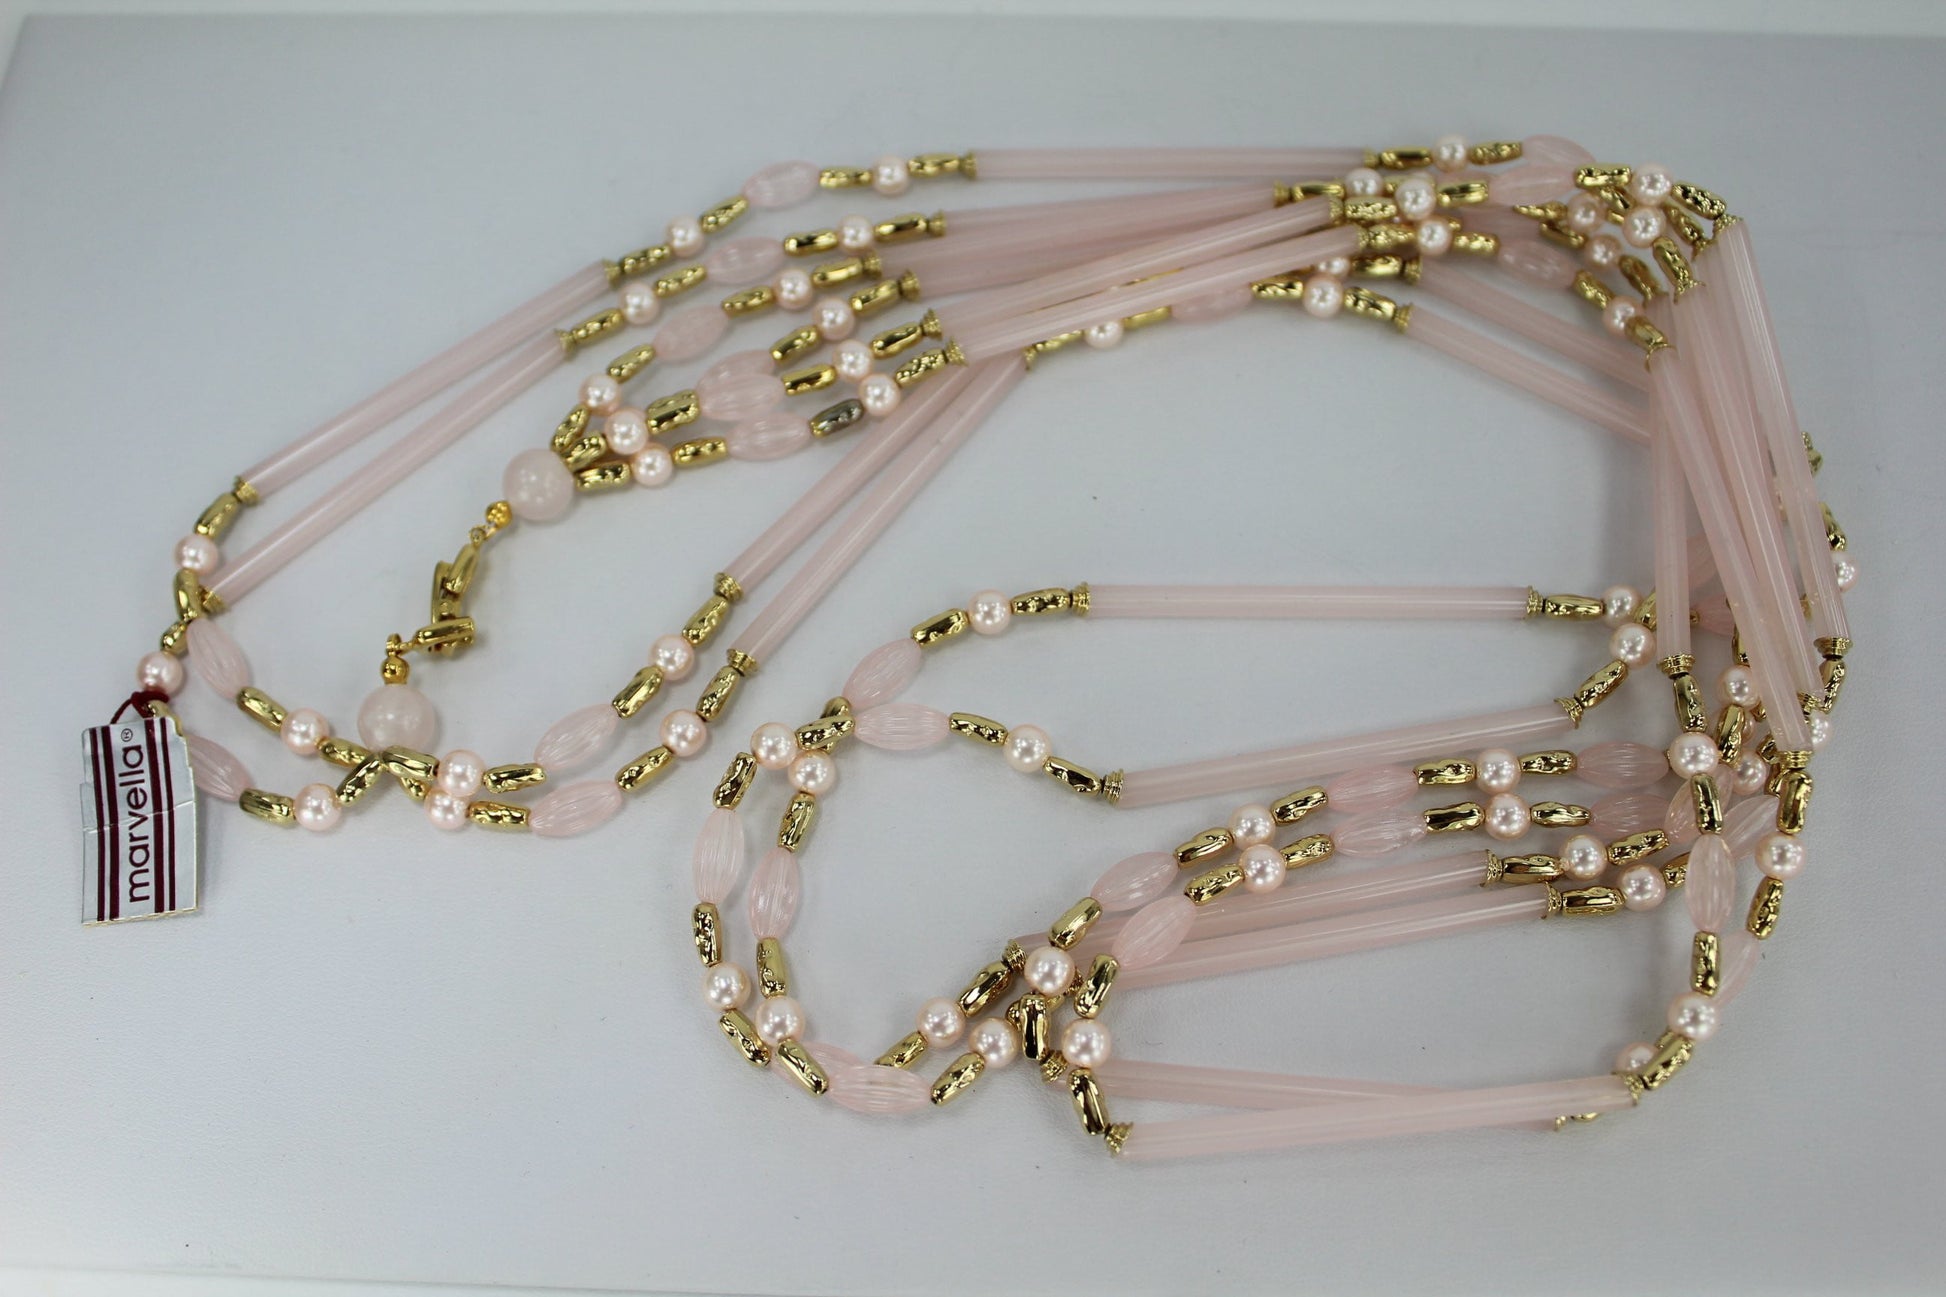 Marvella Pearl Necklace Pink Beads New with Tag 4 strand 34"